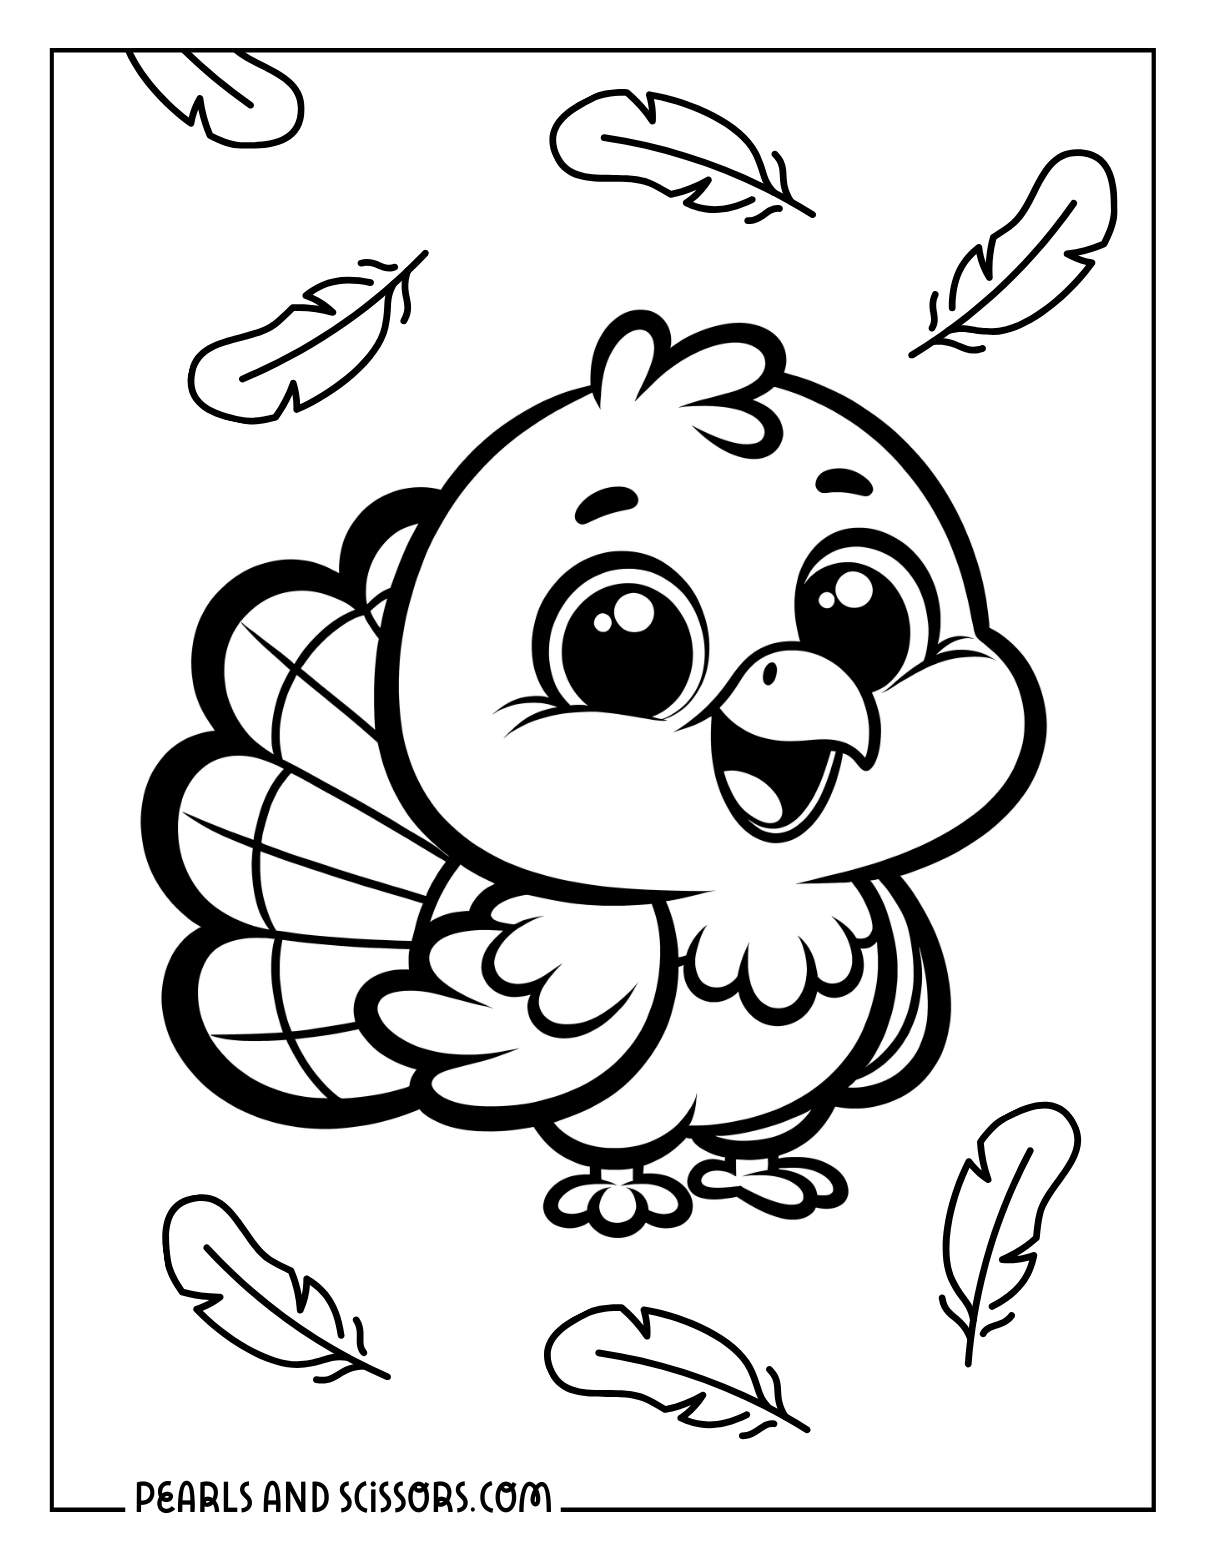 Kawaii baby turkey thanksgiving coloring page for kids.